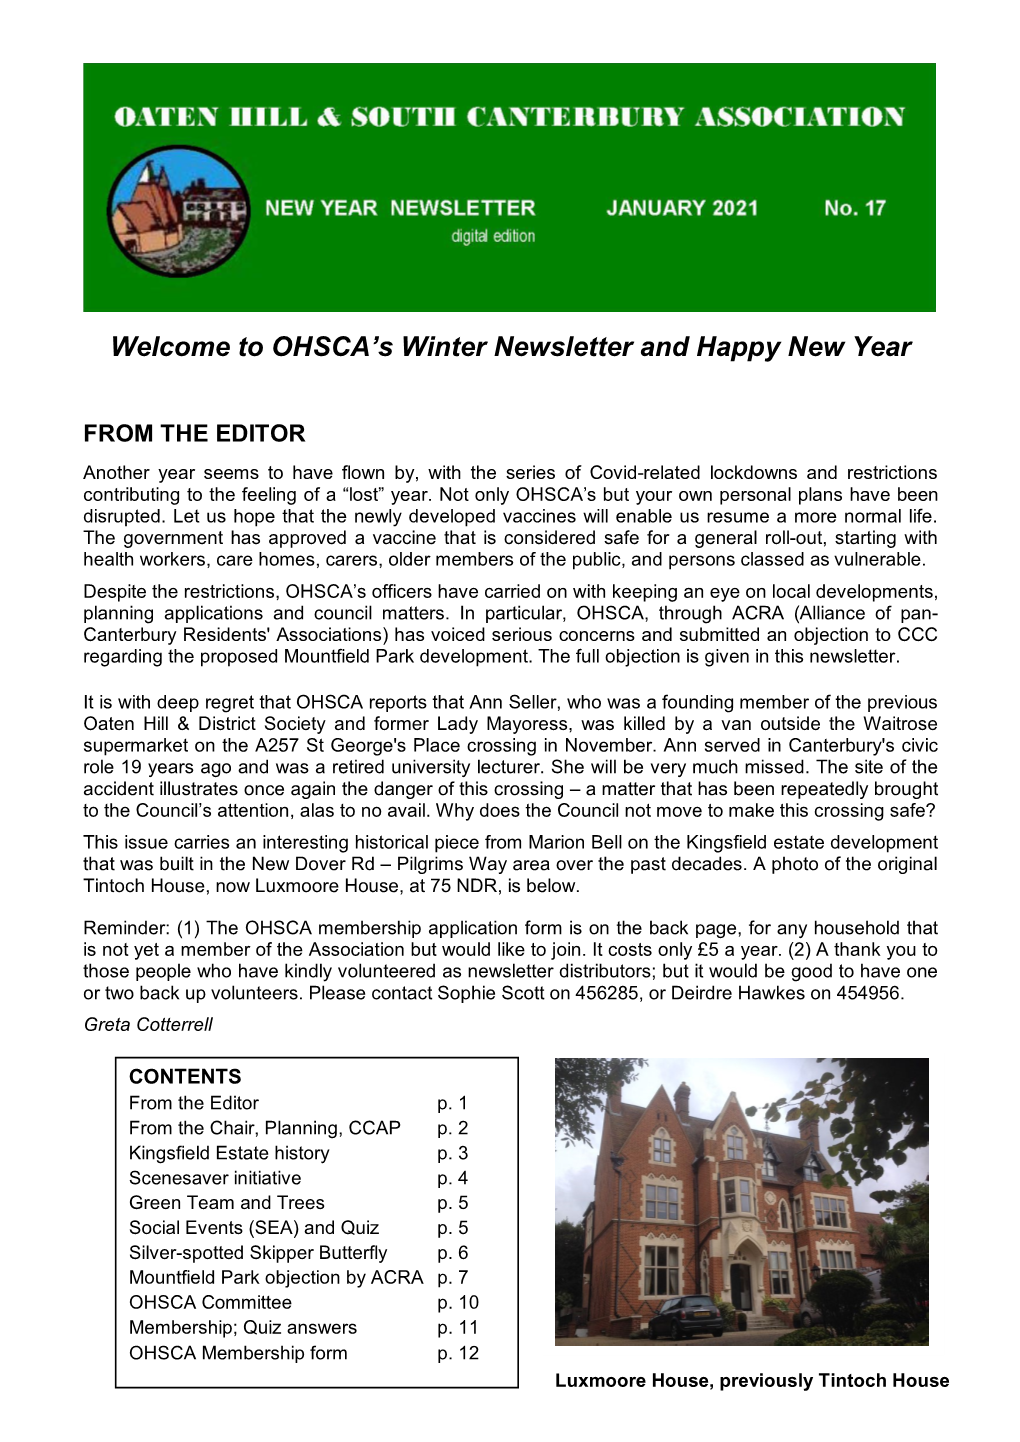 Welcome to OHSCA's Winter Newsletter and Happy New Year